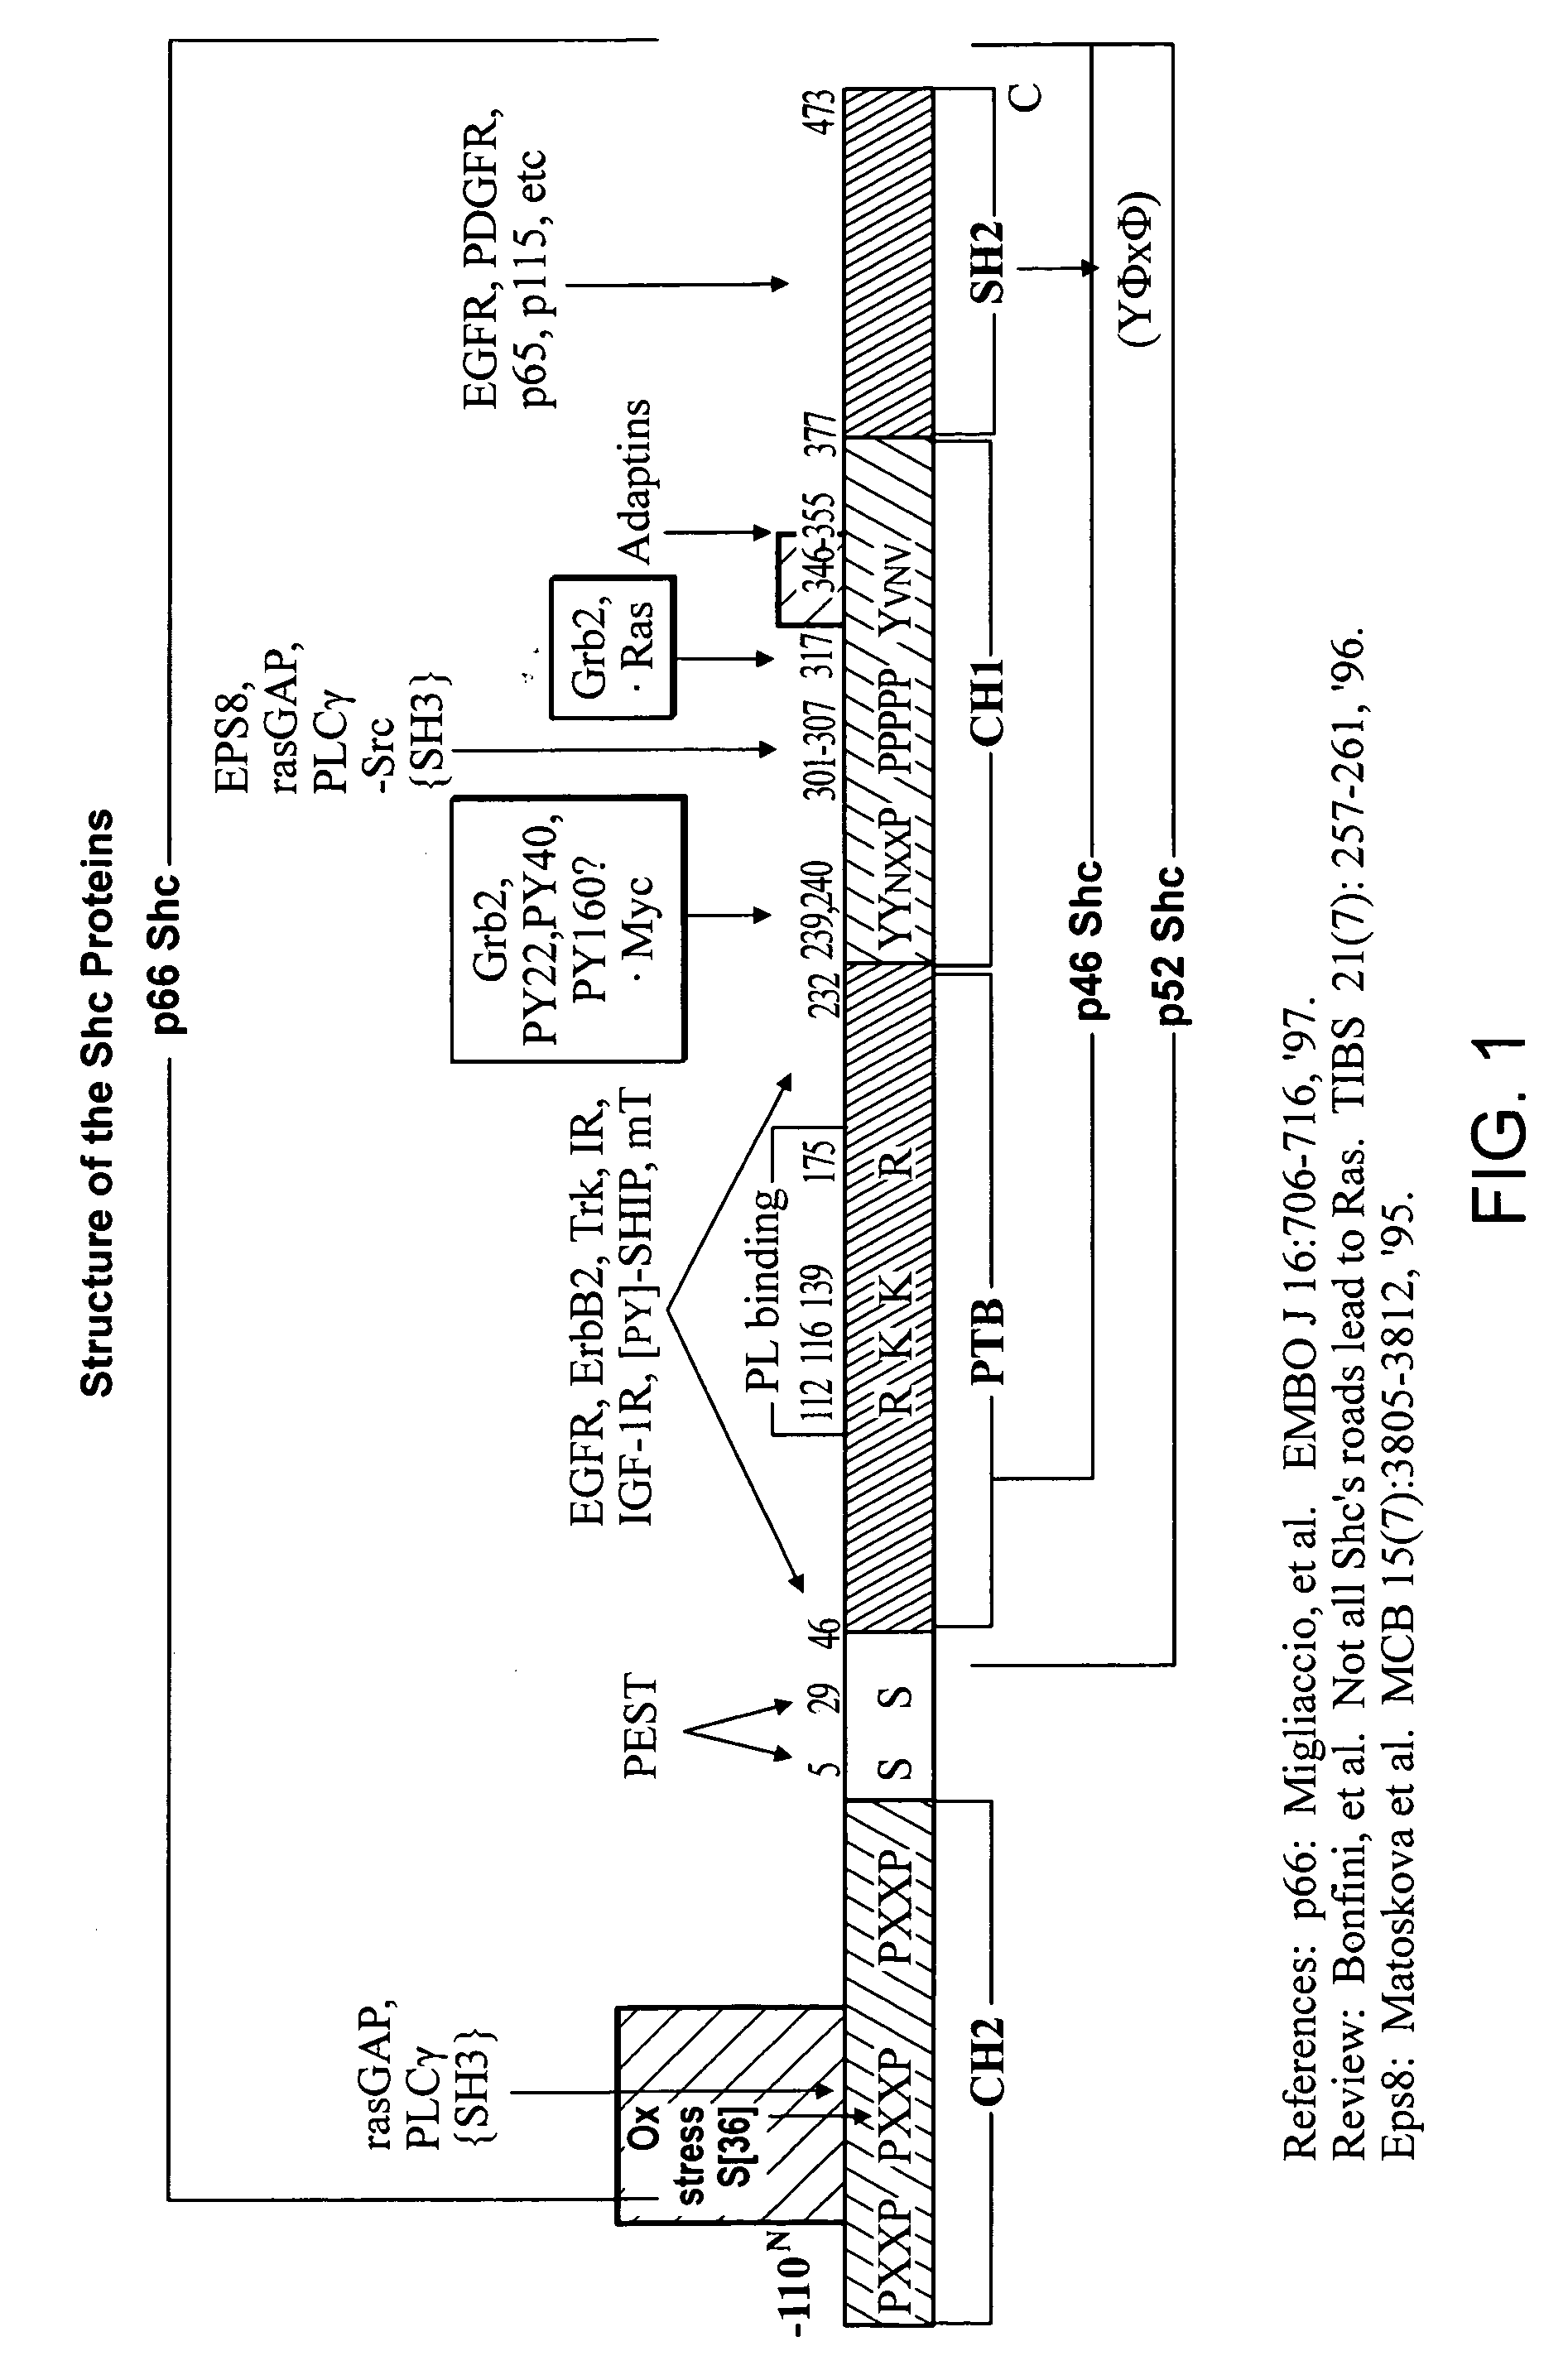 SHC protein-related methods and compositions